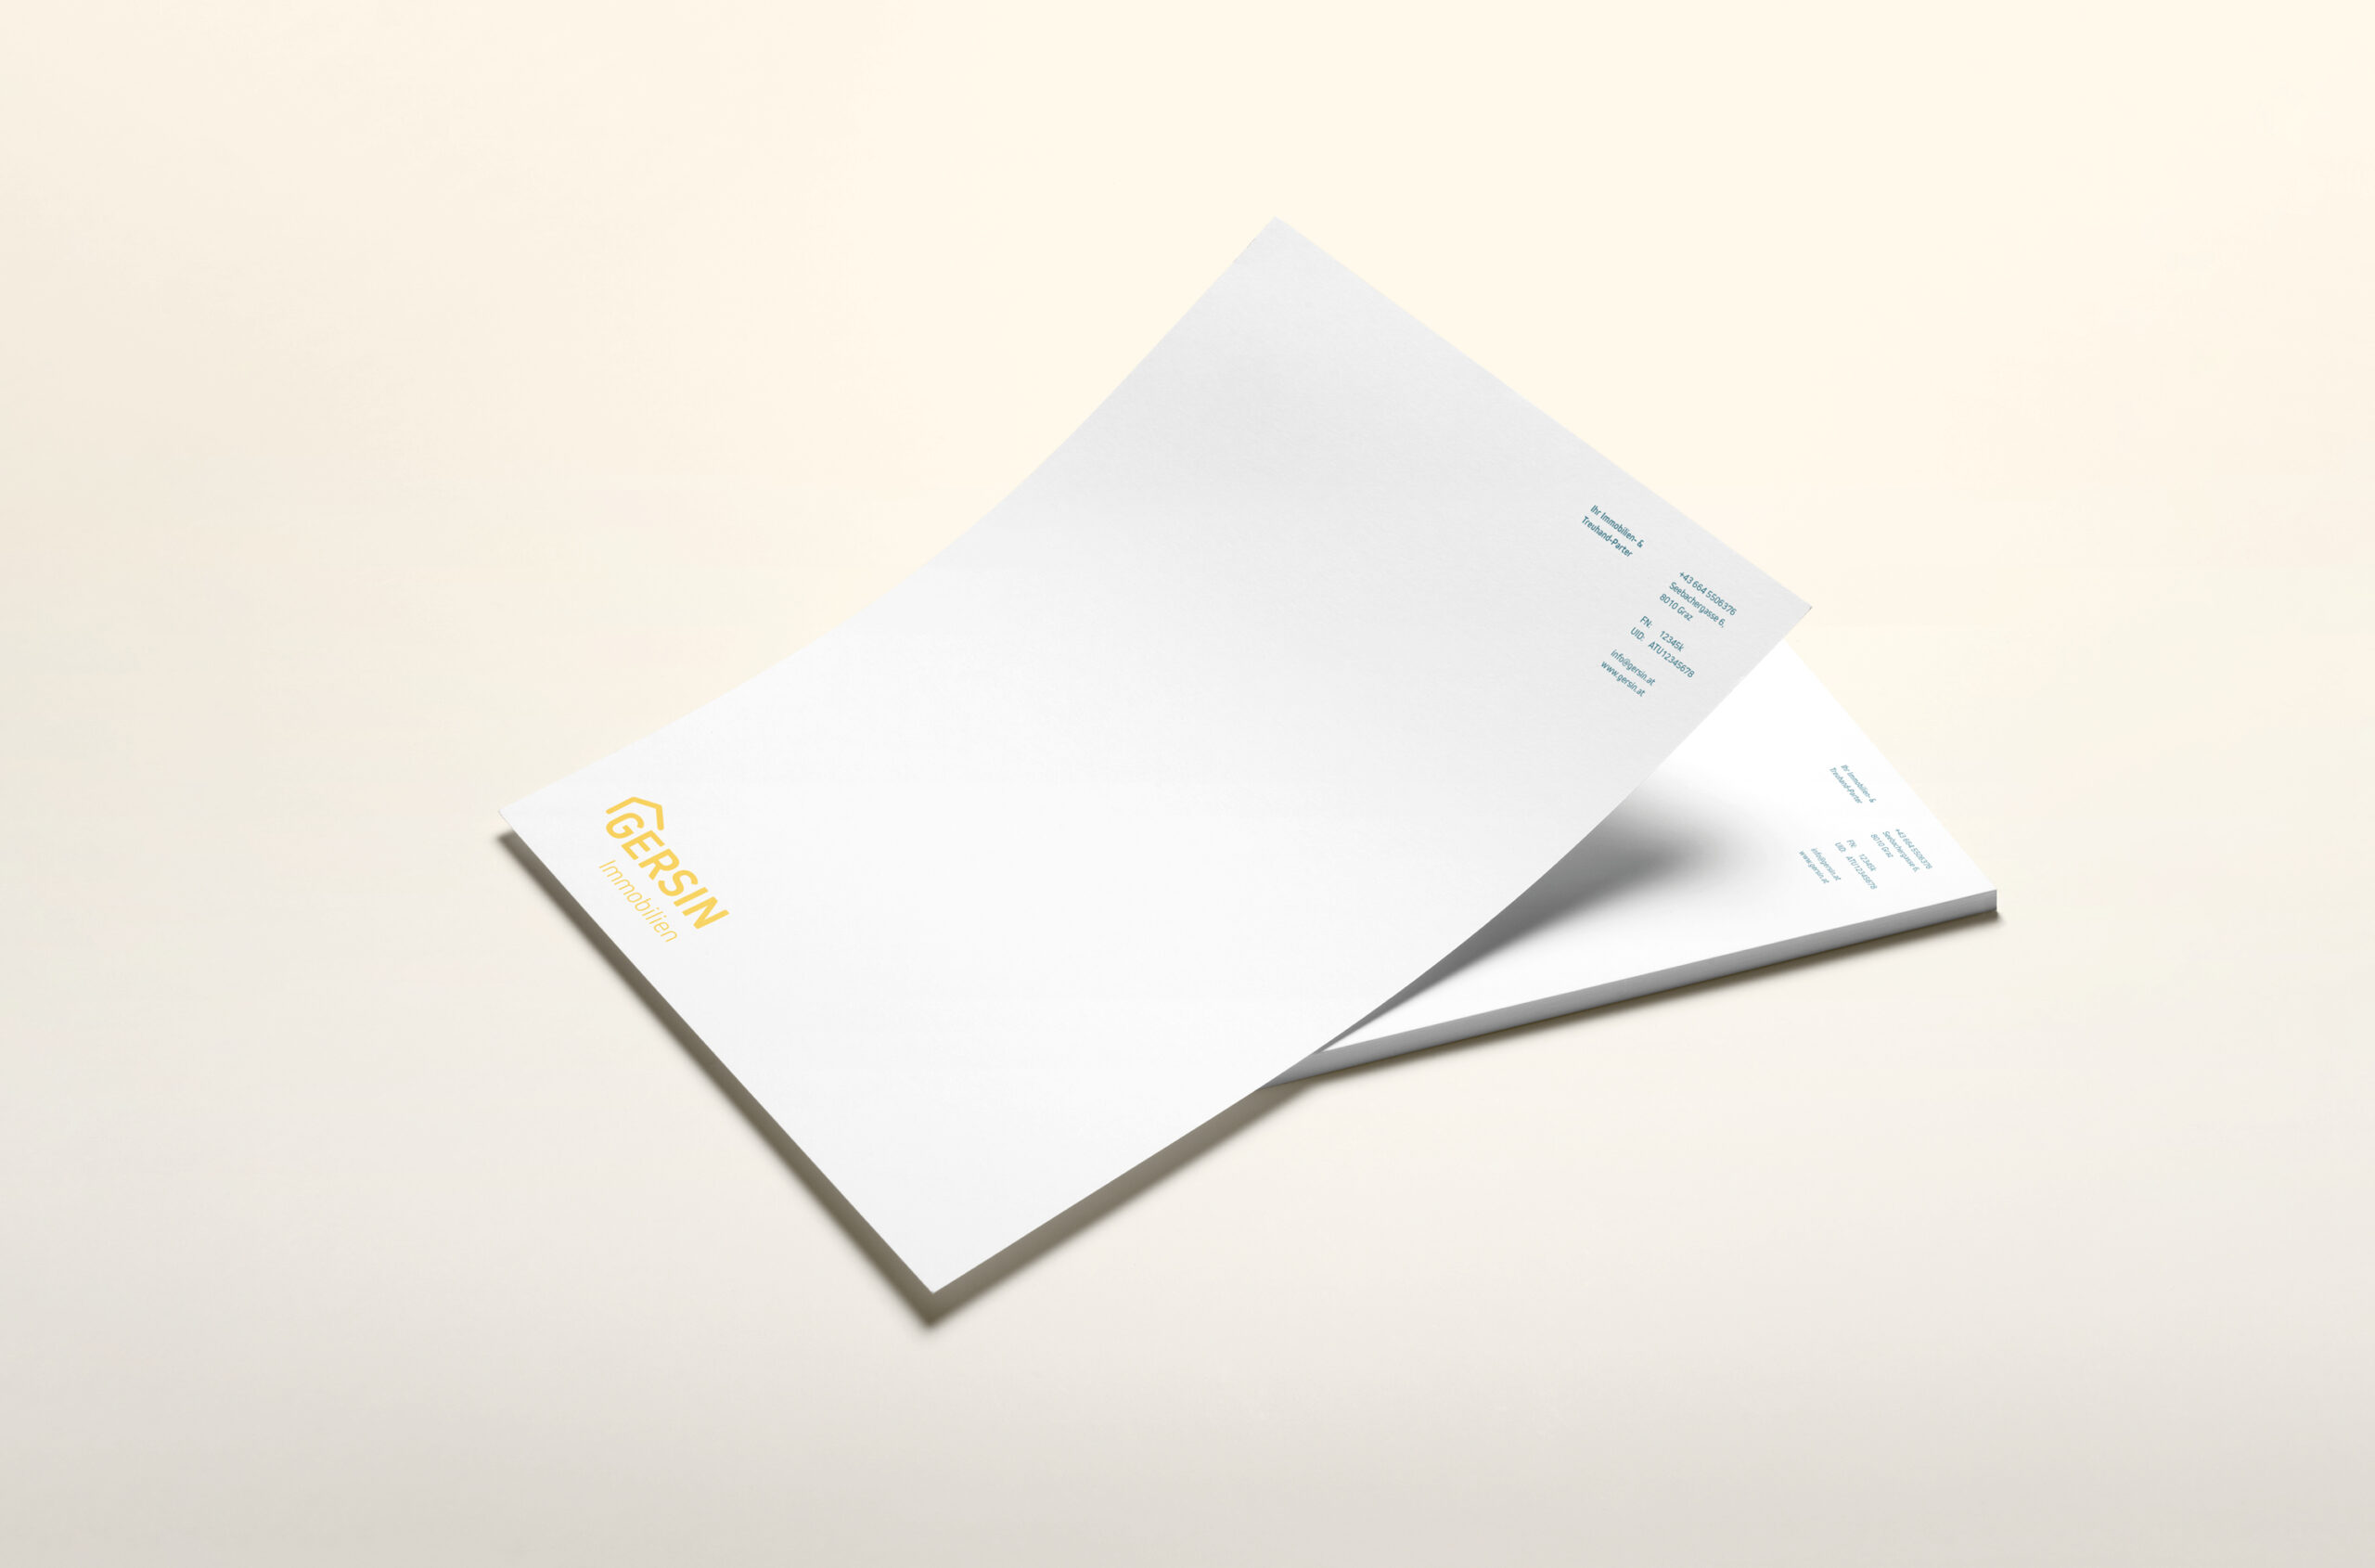 A folded notepad on a white background.